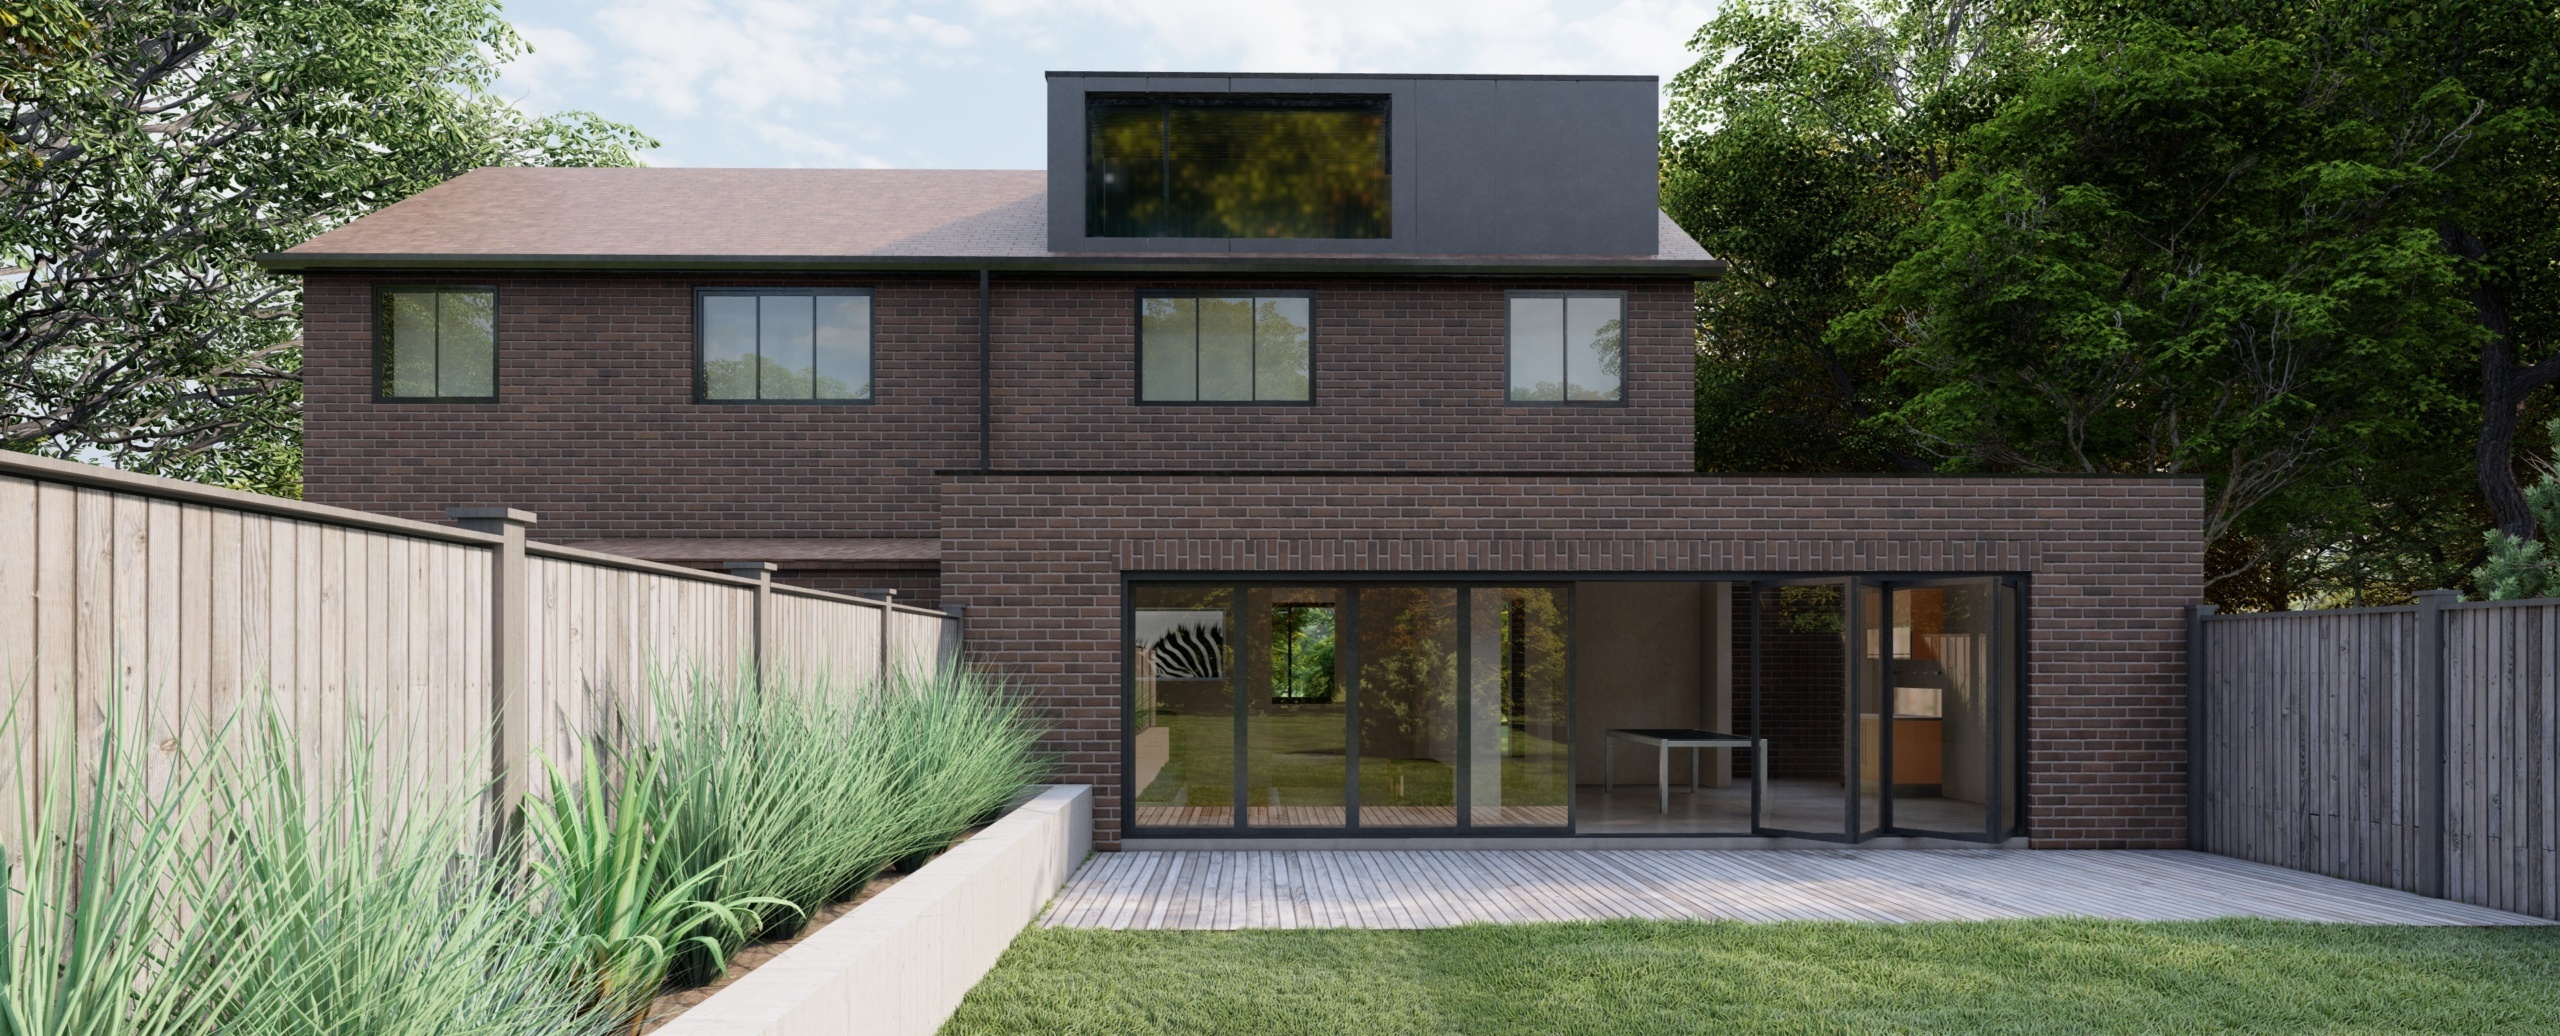 Purley Architects